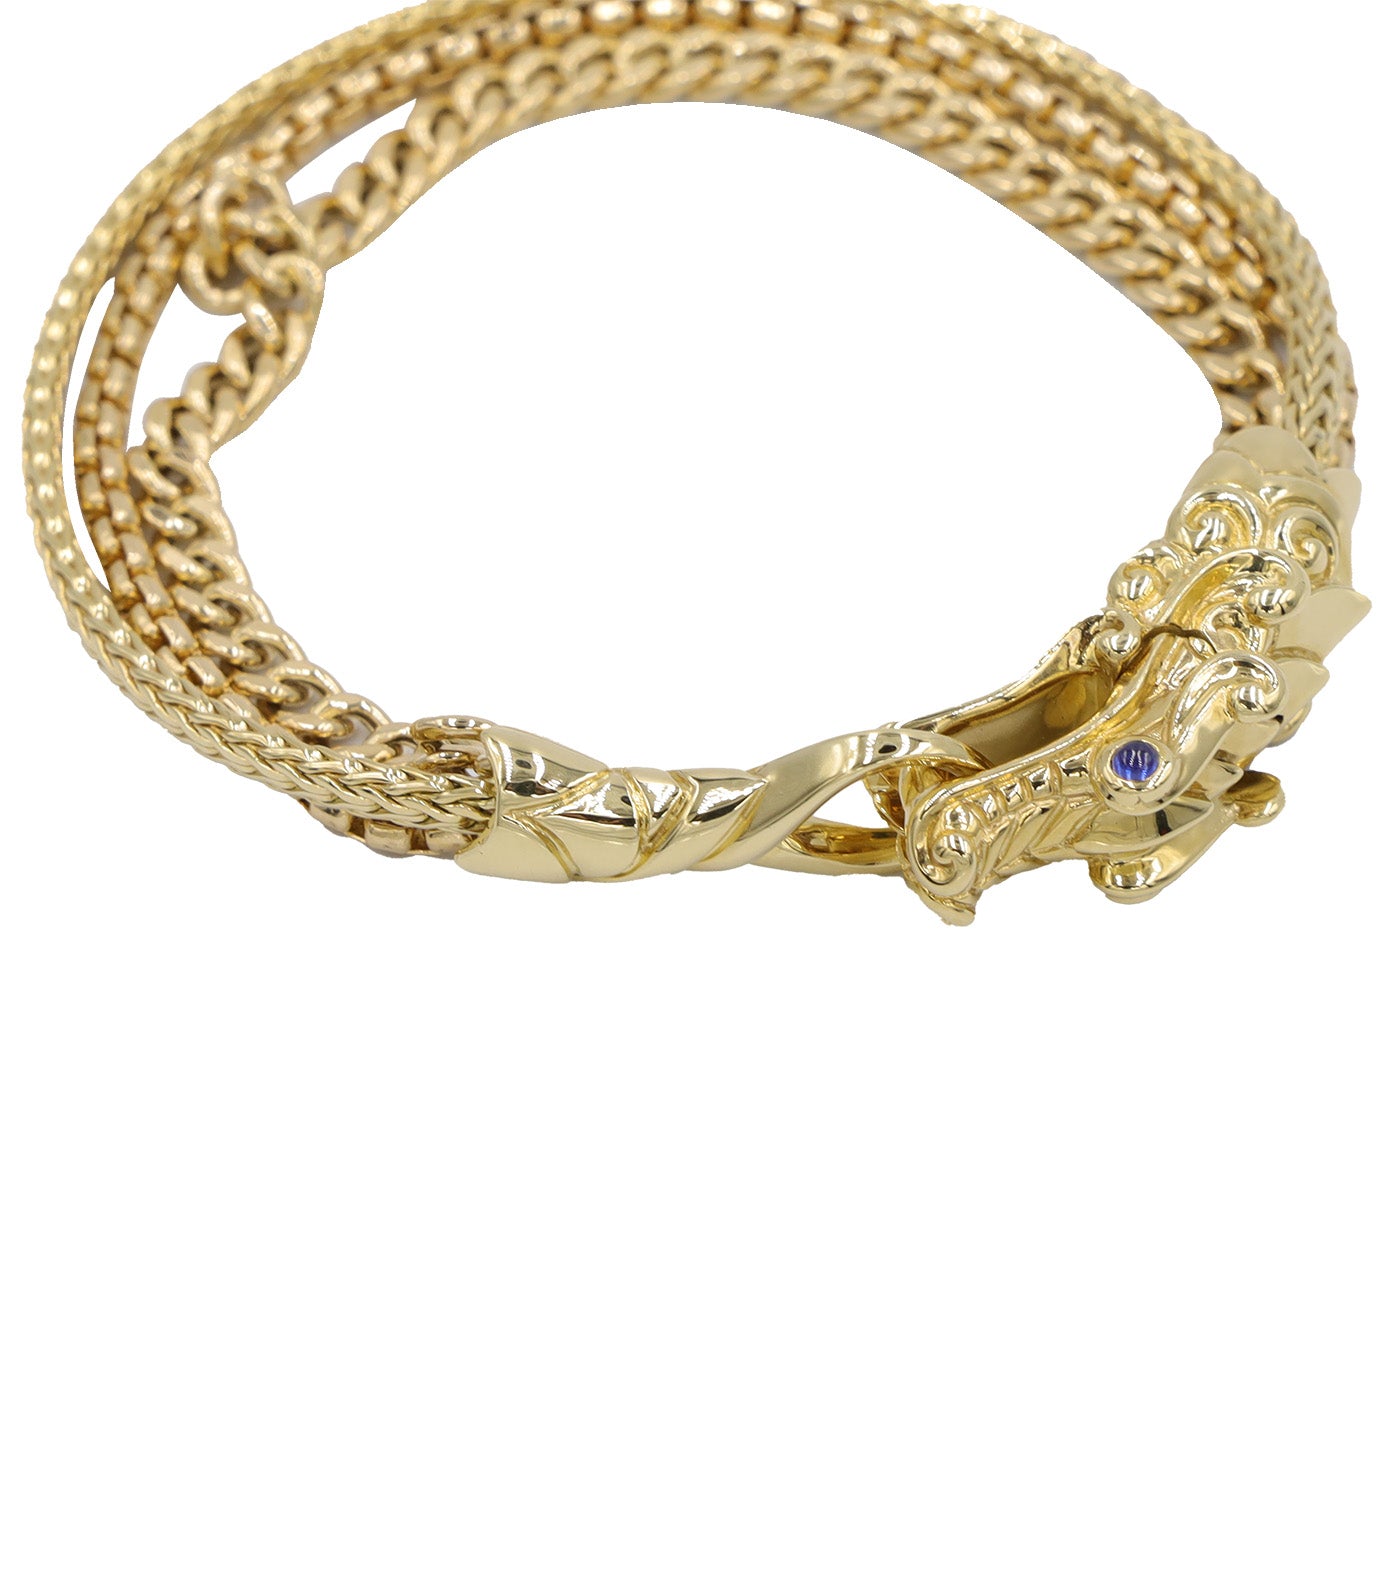 Legends Naga 18K Gold Triple Row Bracelet with Pusher Clasp with Blue Sapphire Eyes